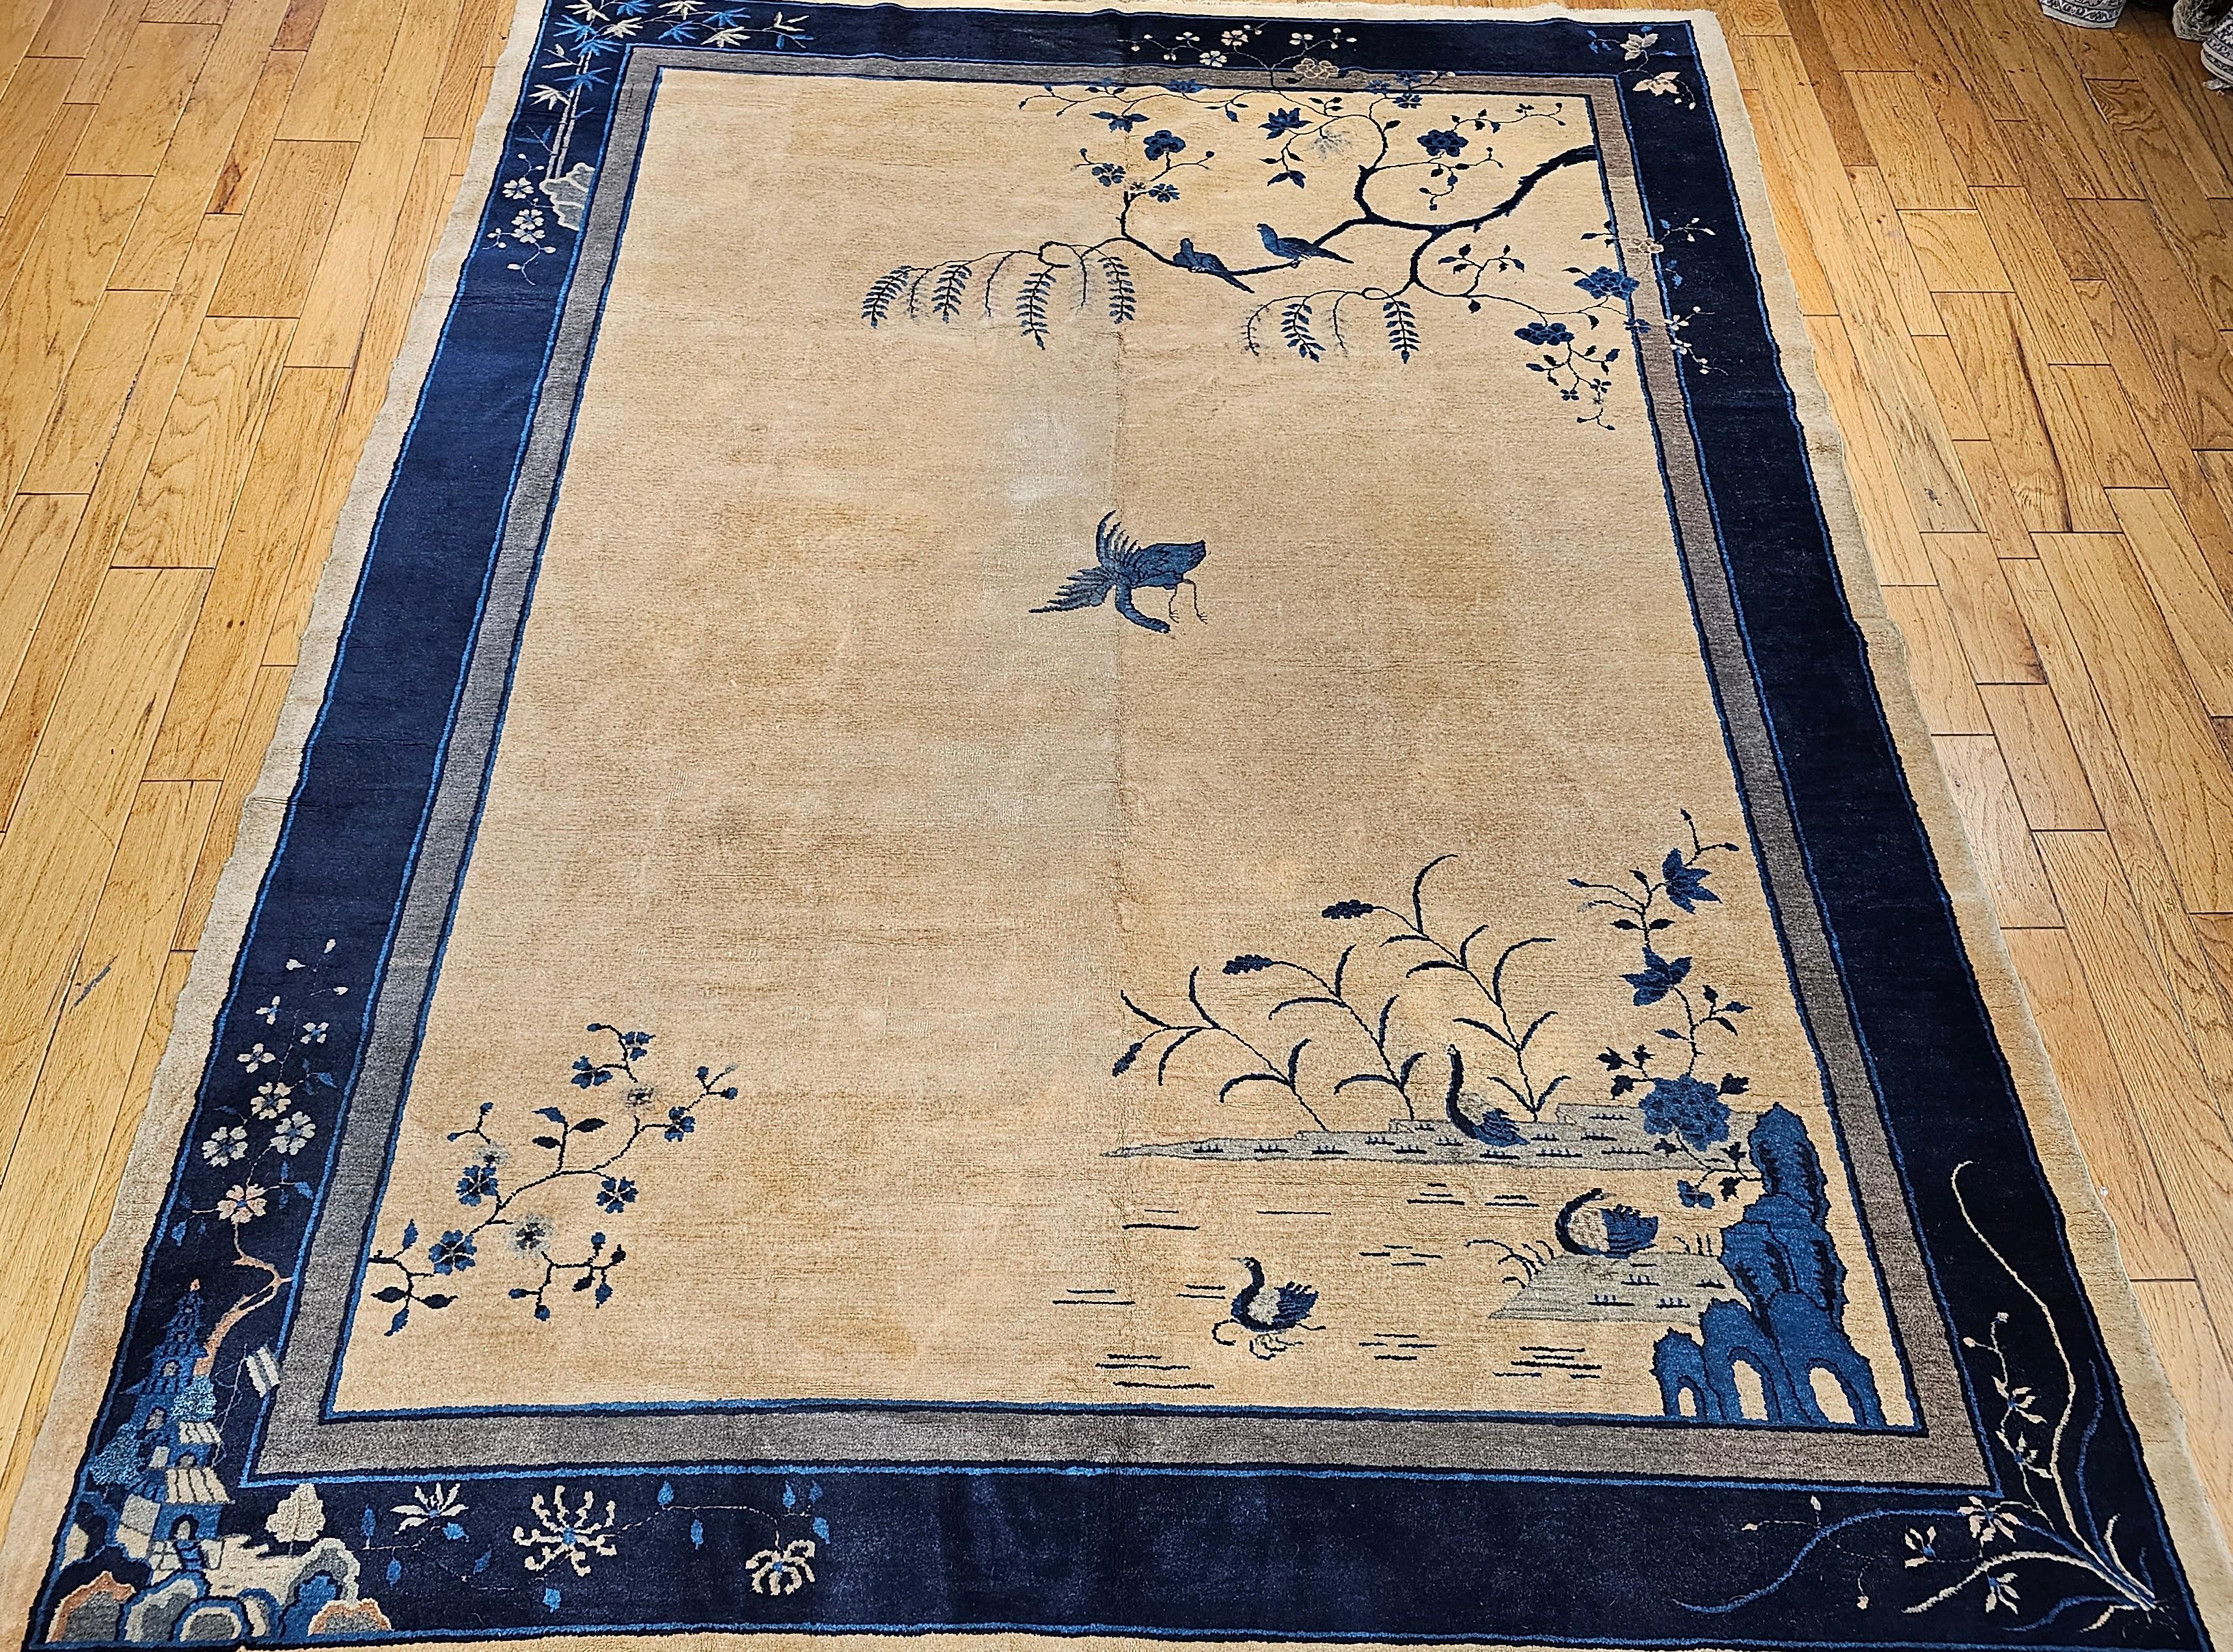 Vintage Art Deco Chinese Rug with Cranes, Pagoda, Mountains in Wheat, Blue, Navy For Sale 13